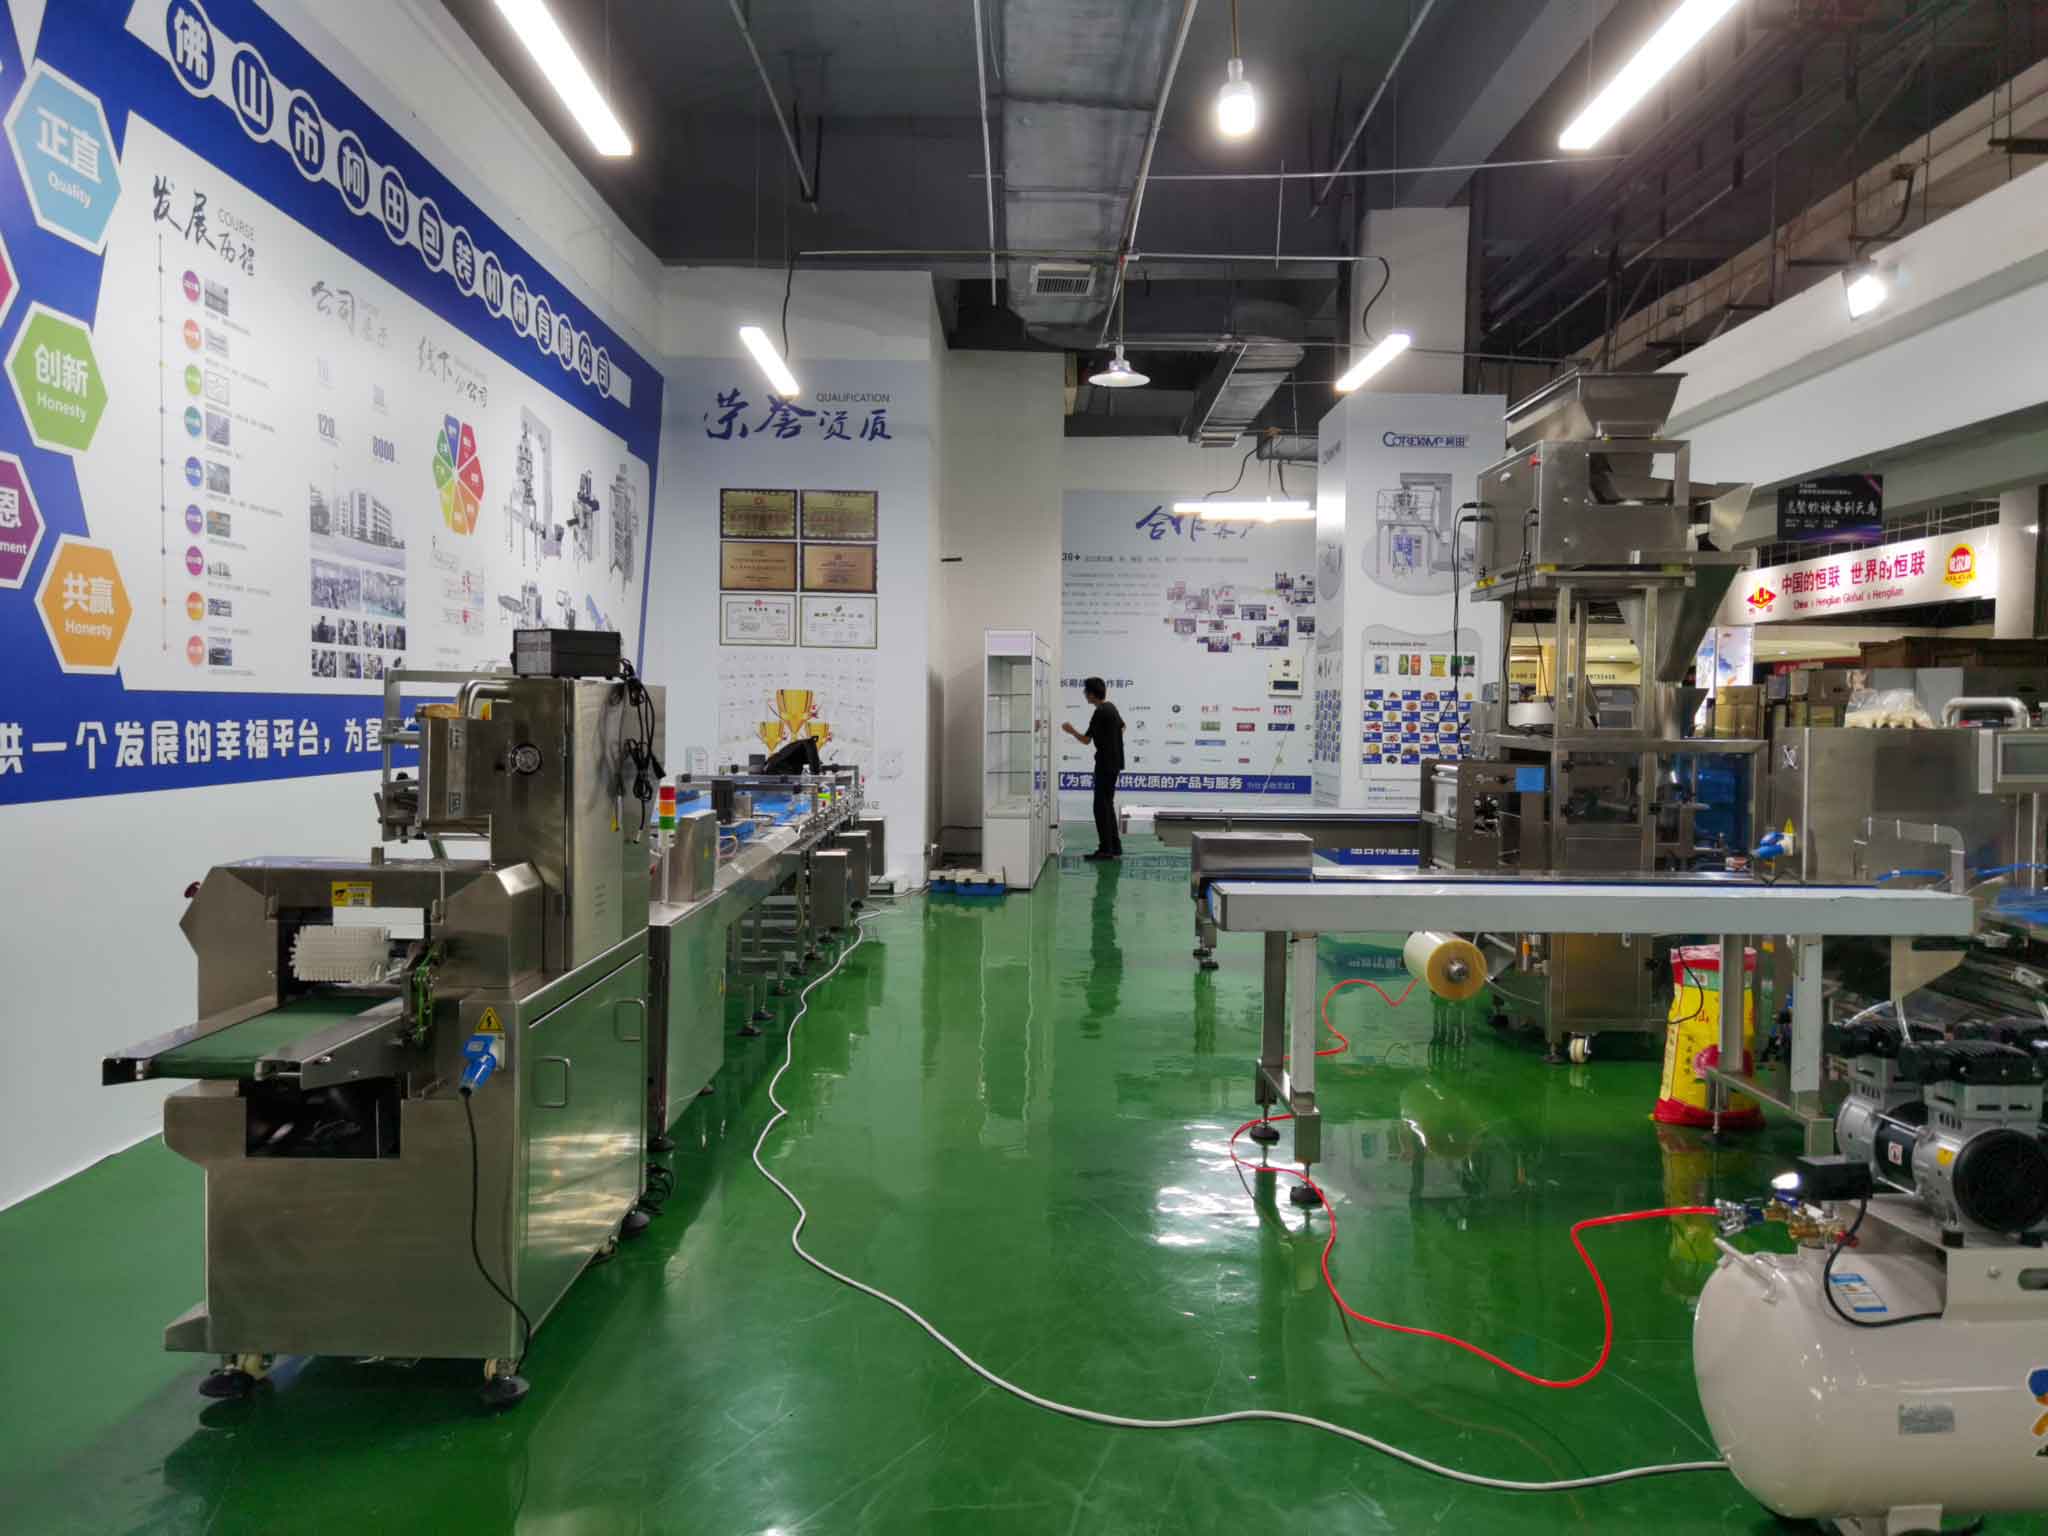 The packing machine showroom of our branch in Chengdu, China